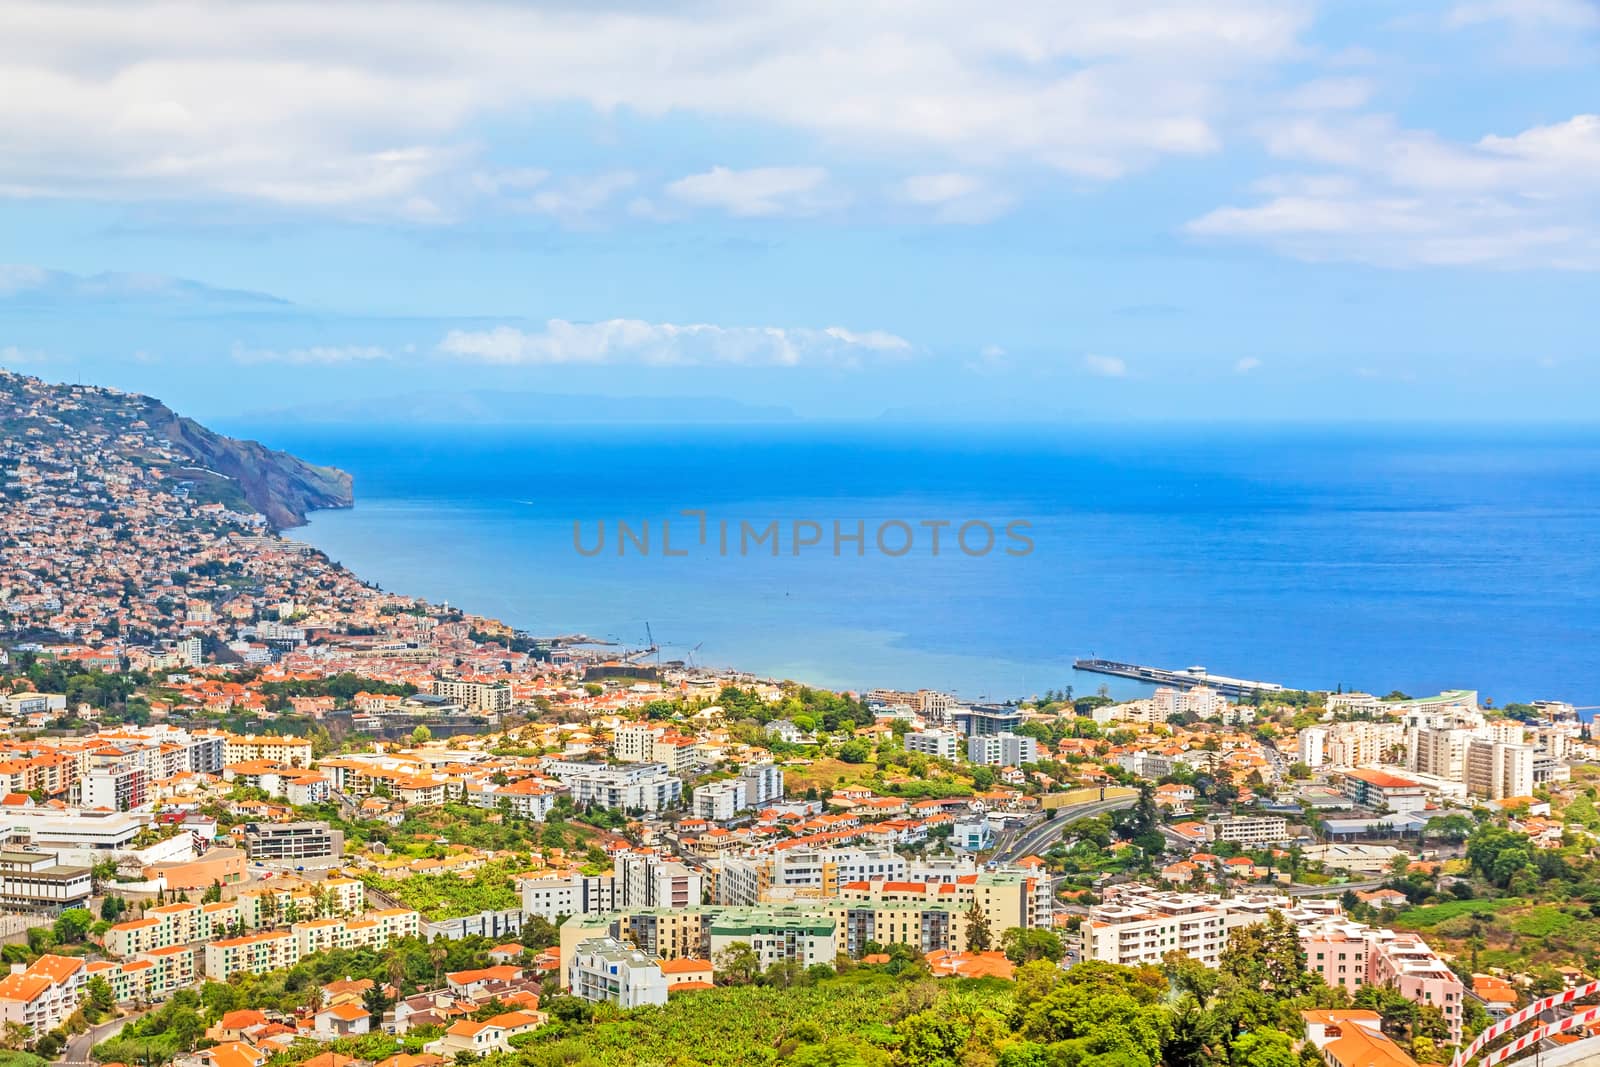 Funchal, Madeira - June 7, 2013: South coast of Funchal -view over the capital city of Madeira towards harbor. View from Pico dos Barcelo - Atlantic Ocean in the background.